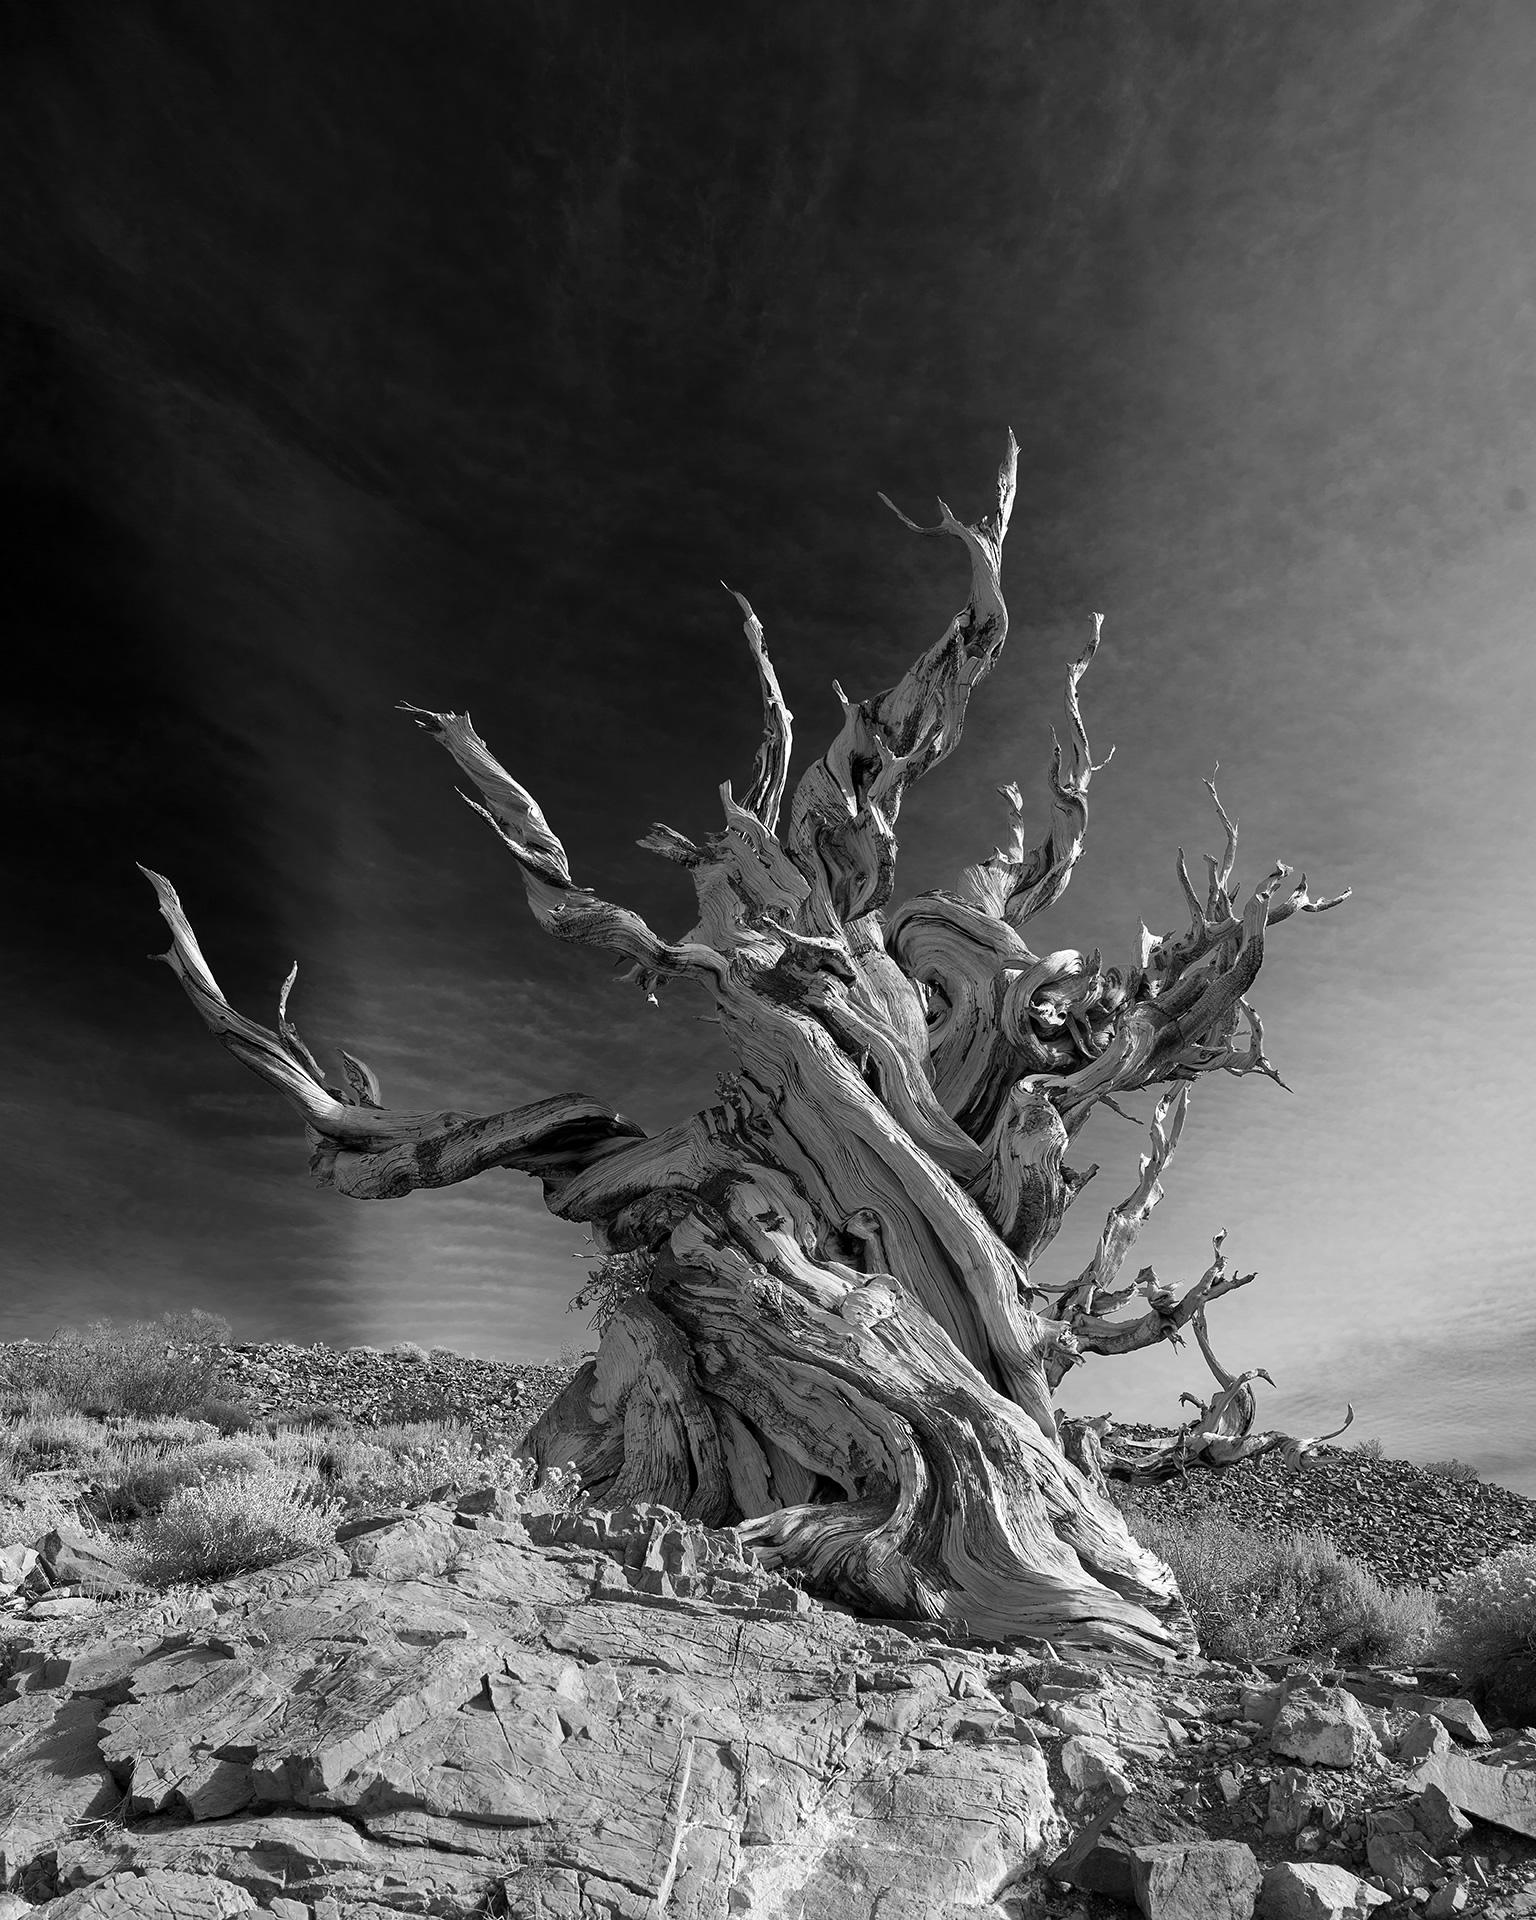 Tree Study V - large scale photograph of dramatic mountain landscape